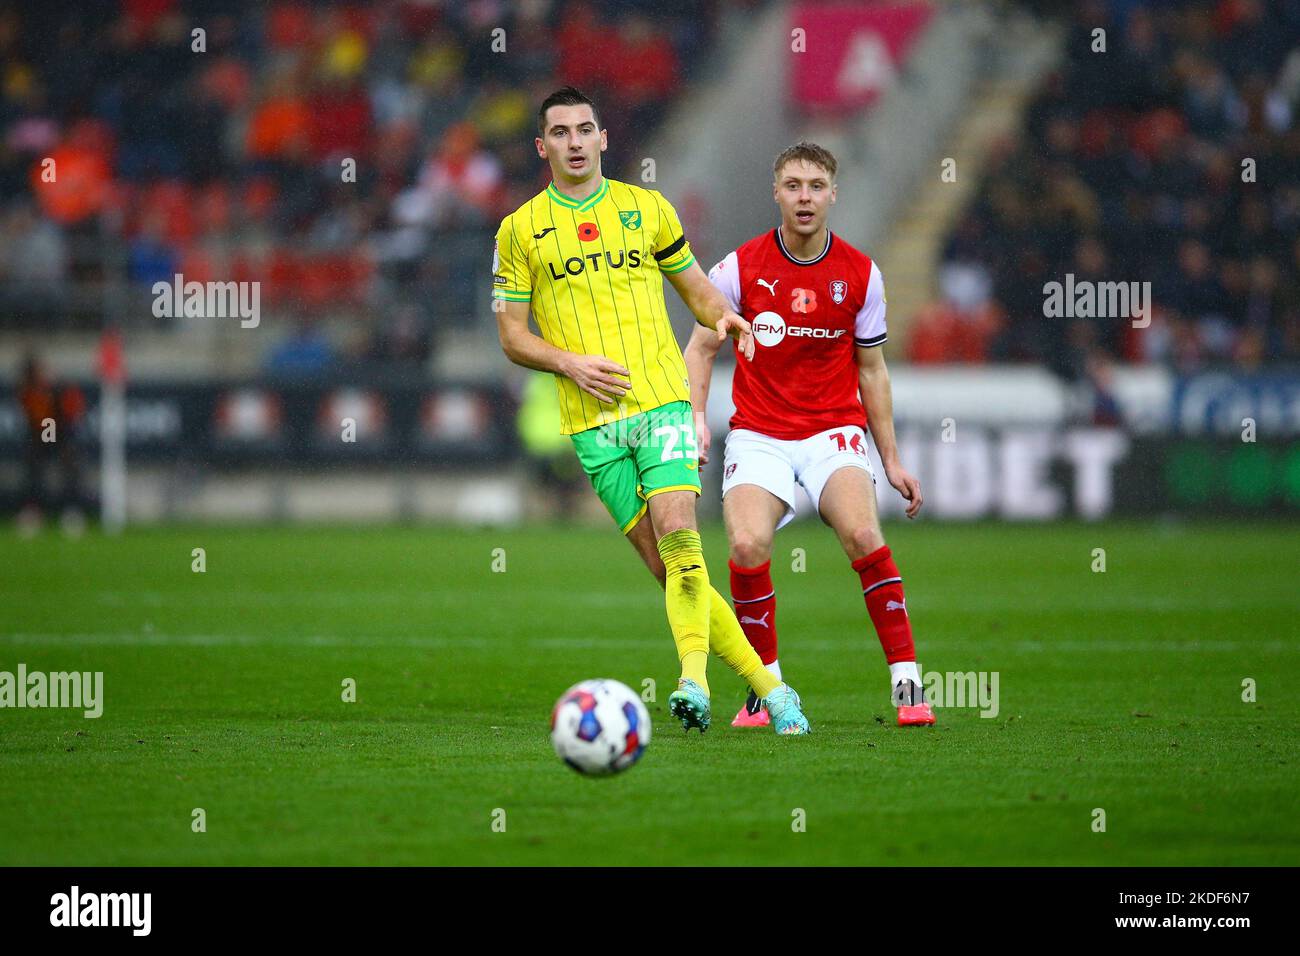 AESSEAL New York Stadium, Rotherham, England - 5th November 2022 Kenny McLean (23) of Norwich City being followed by Jamie Lindsay (16) of Rotherham United - during the game Rotherham v Norwich City, Sky Bet Championship,  2022/23, AESSEAL New York Stadium, Rotherham, England - 5th November 2022 Credit: Arthur Haigh/WhiteRosePhotos/Alamy Live News Stock Photo